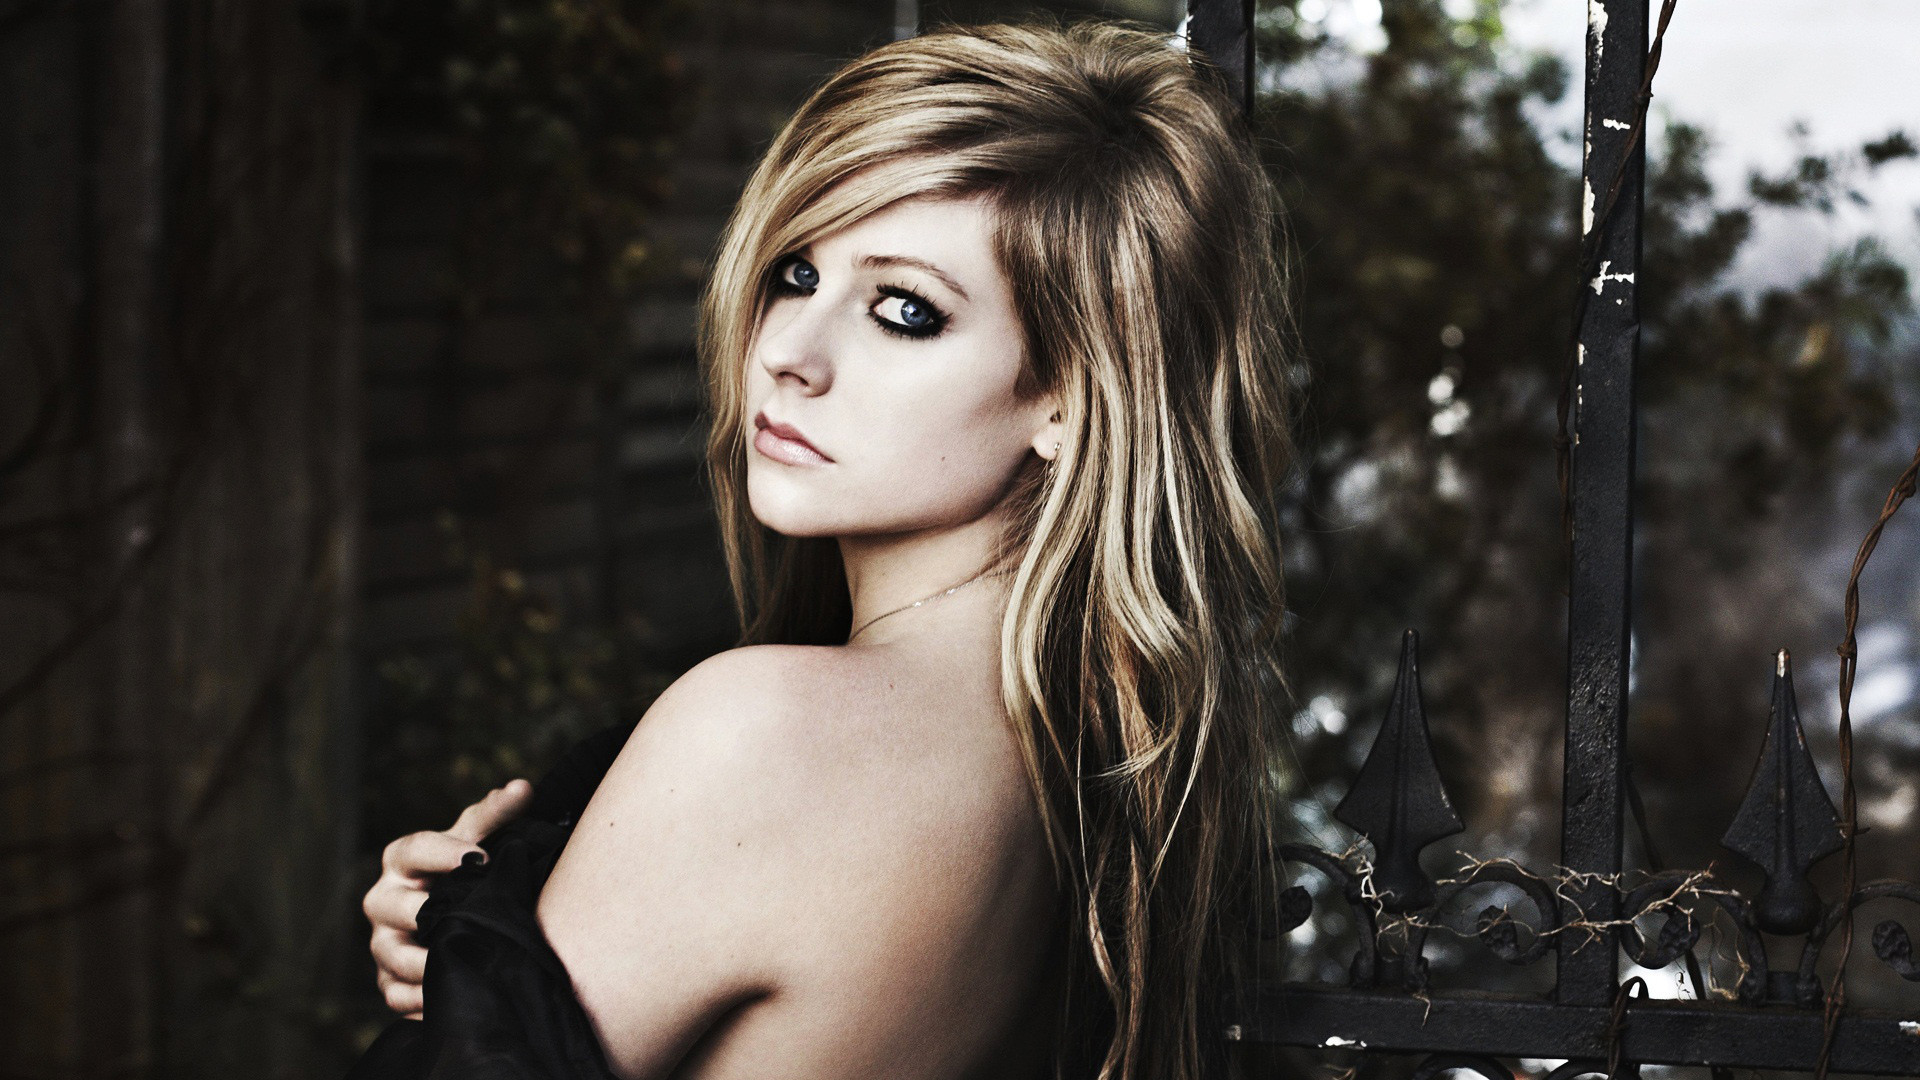 1920x1080 HD Avril Lavigne Wallpapers 01 HD Avril Lavigne Wallpapers 02